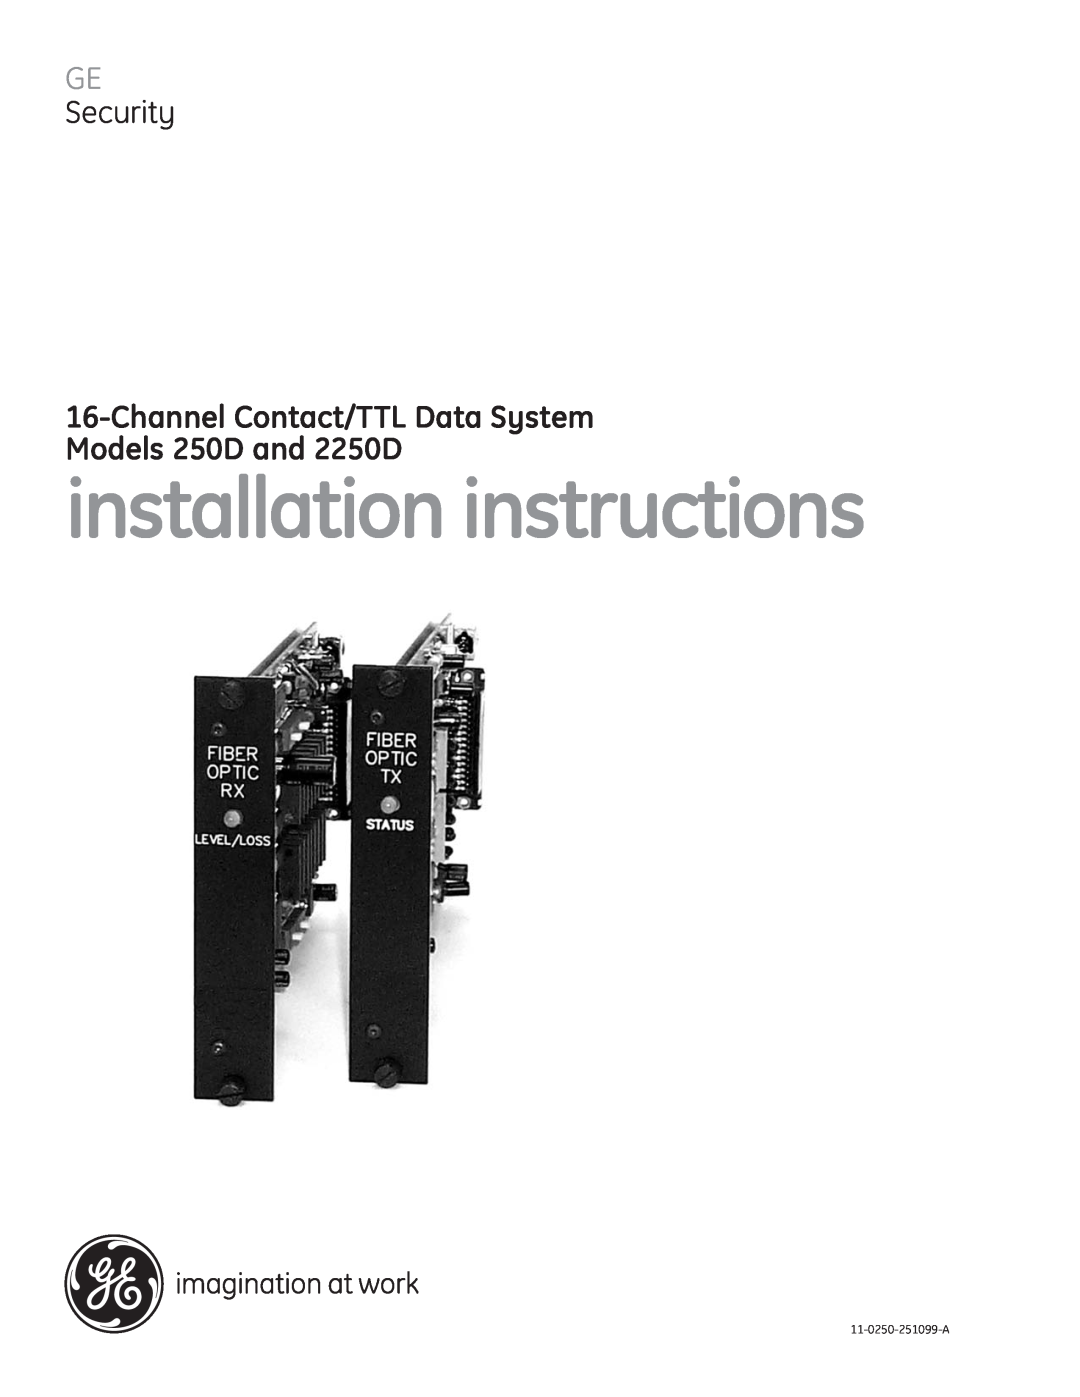 GE installation instructions Security, Channel Contact/TTL Data System Models 250D and 2250D, 11-0250-251099-A 